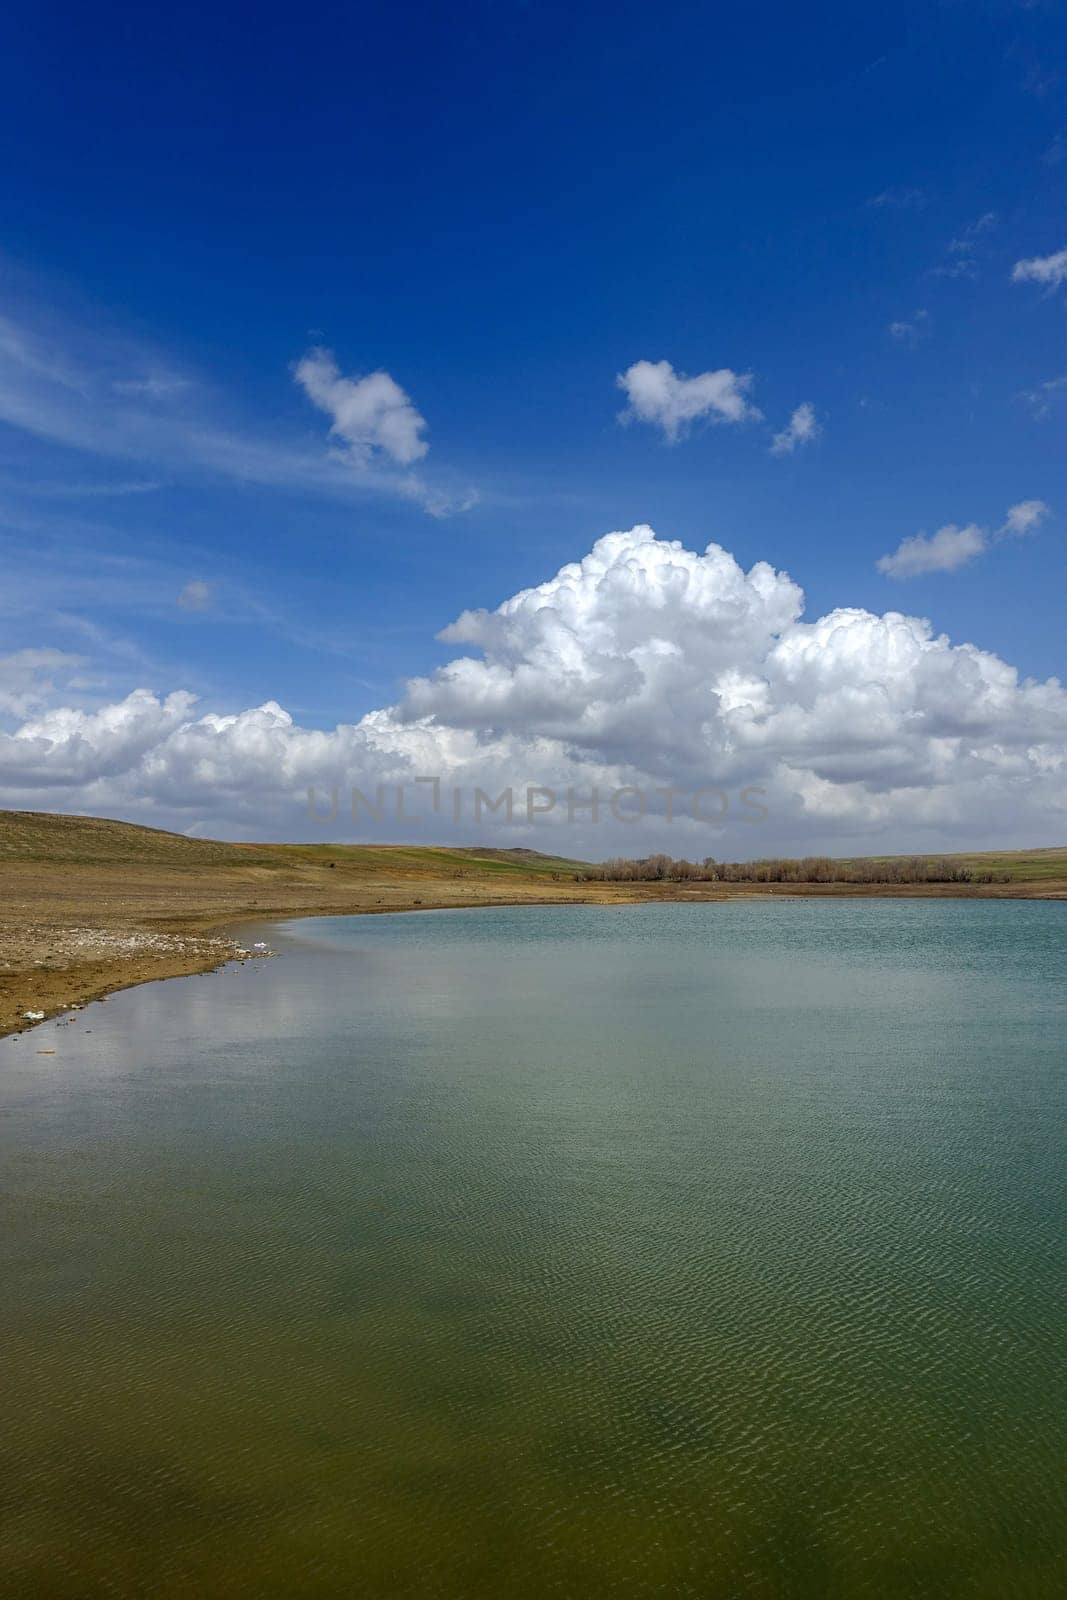 wonderful spring landscape of sky lake and clouds,clouds reflecting in water, by nhatipoglu